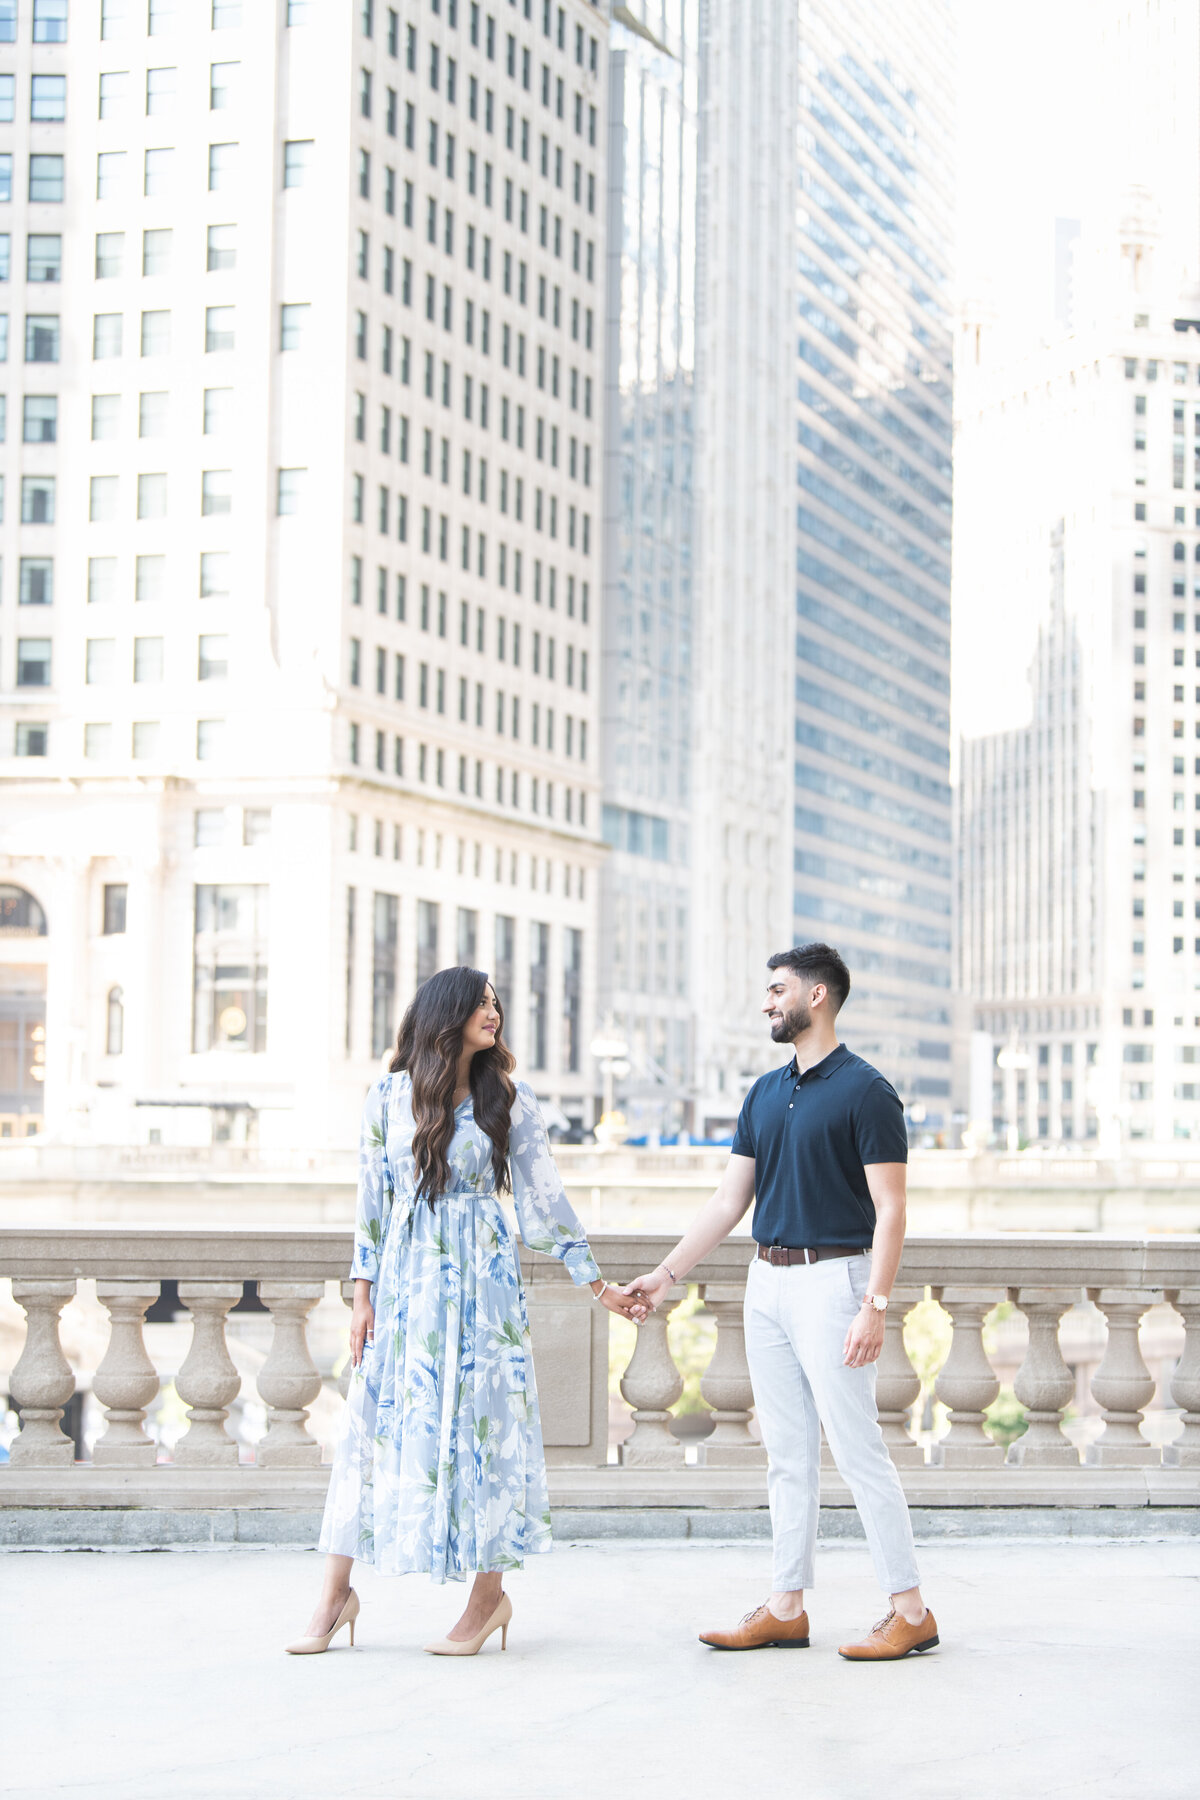 Maha Studios Wedding Photography Chicago New York California Sophisticated and vibrant photography honoring modern South Asian and multicultural weddings4